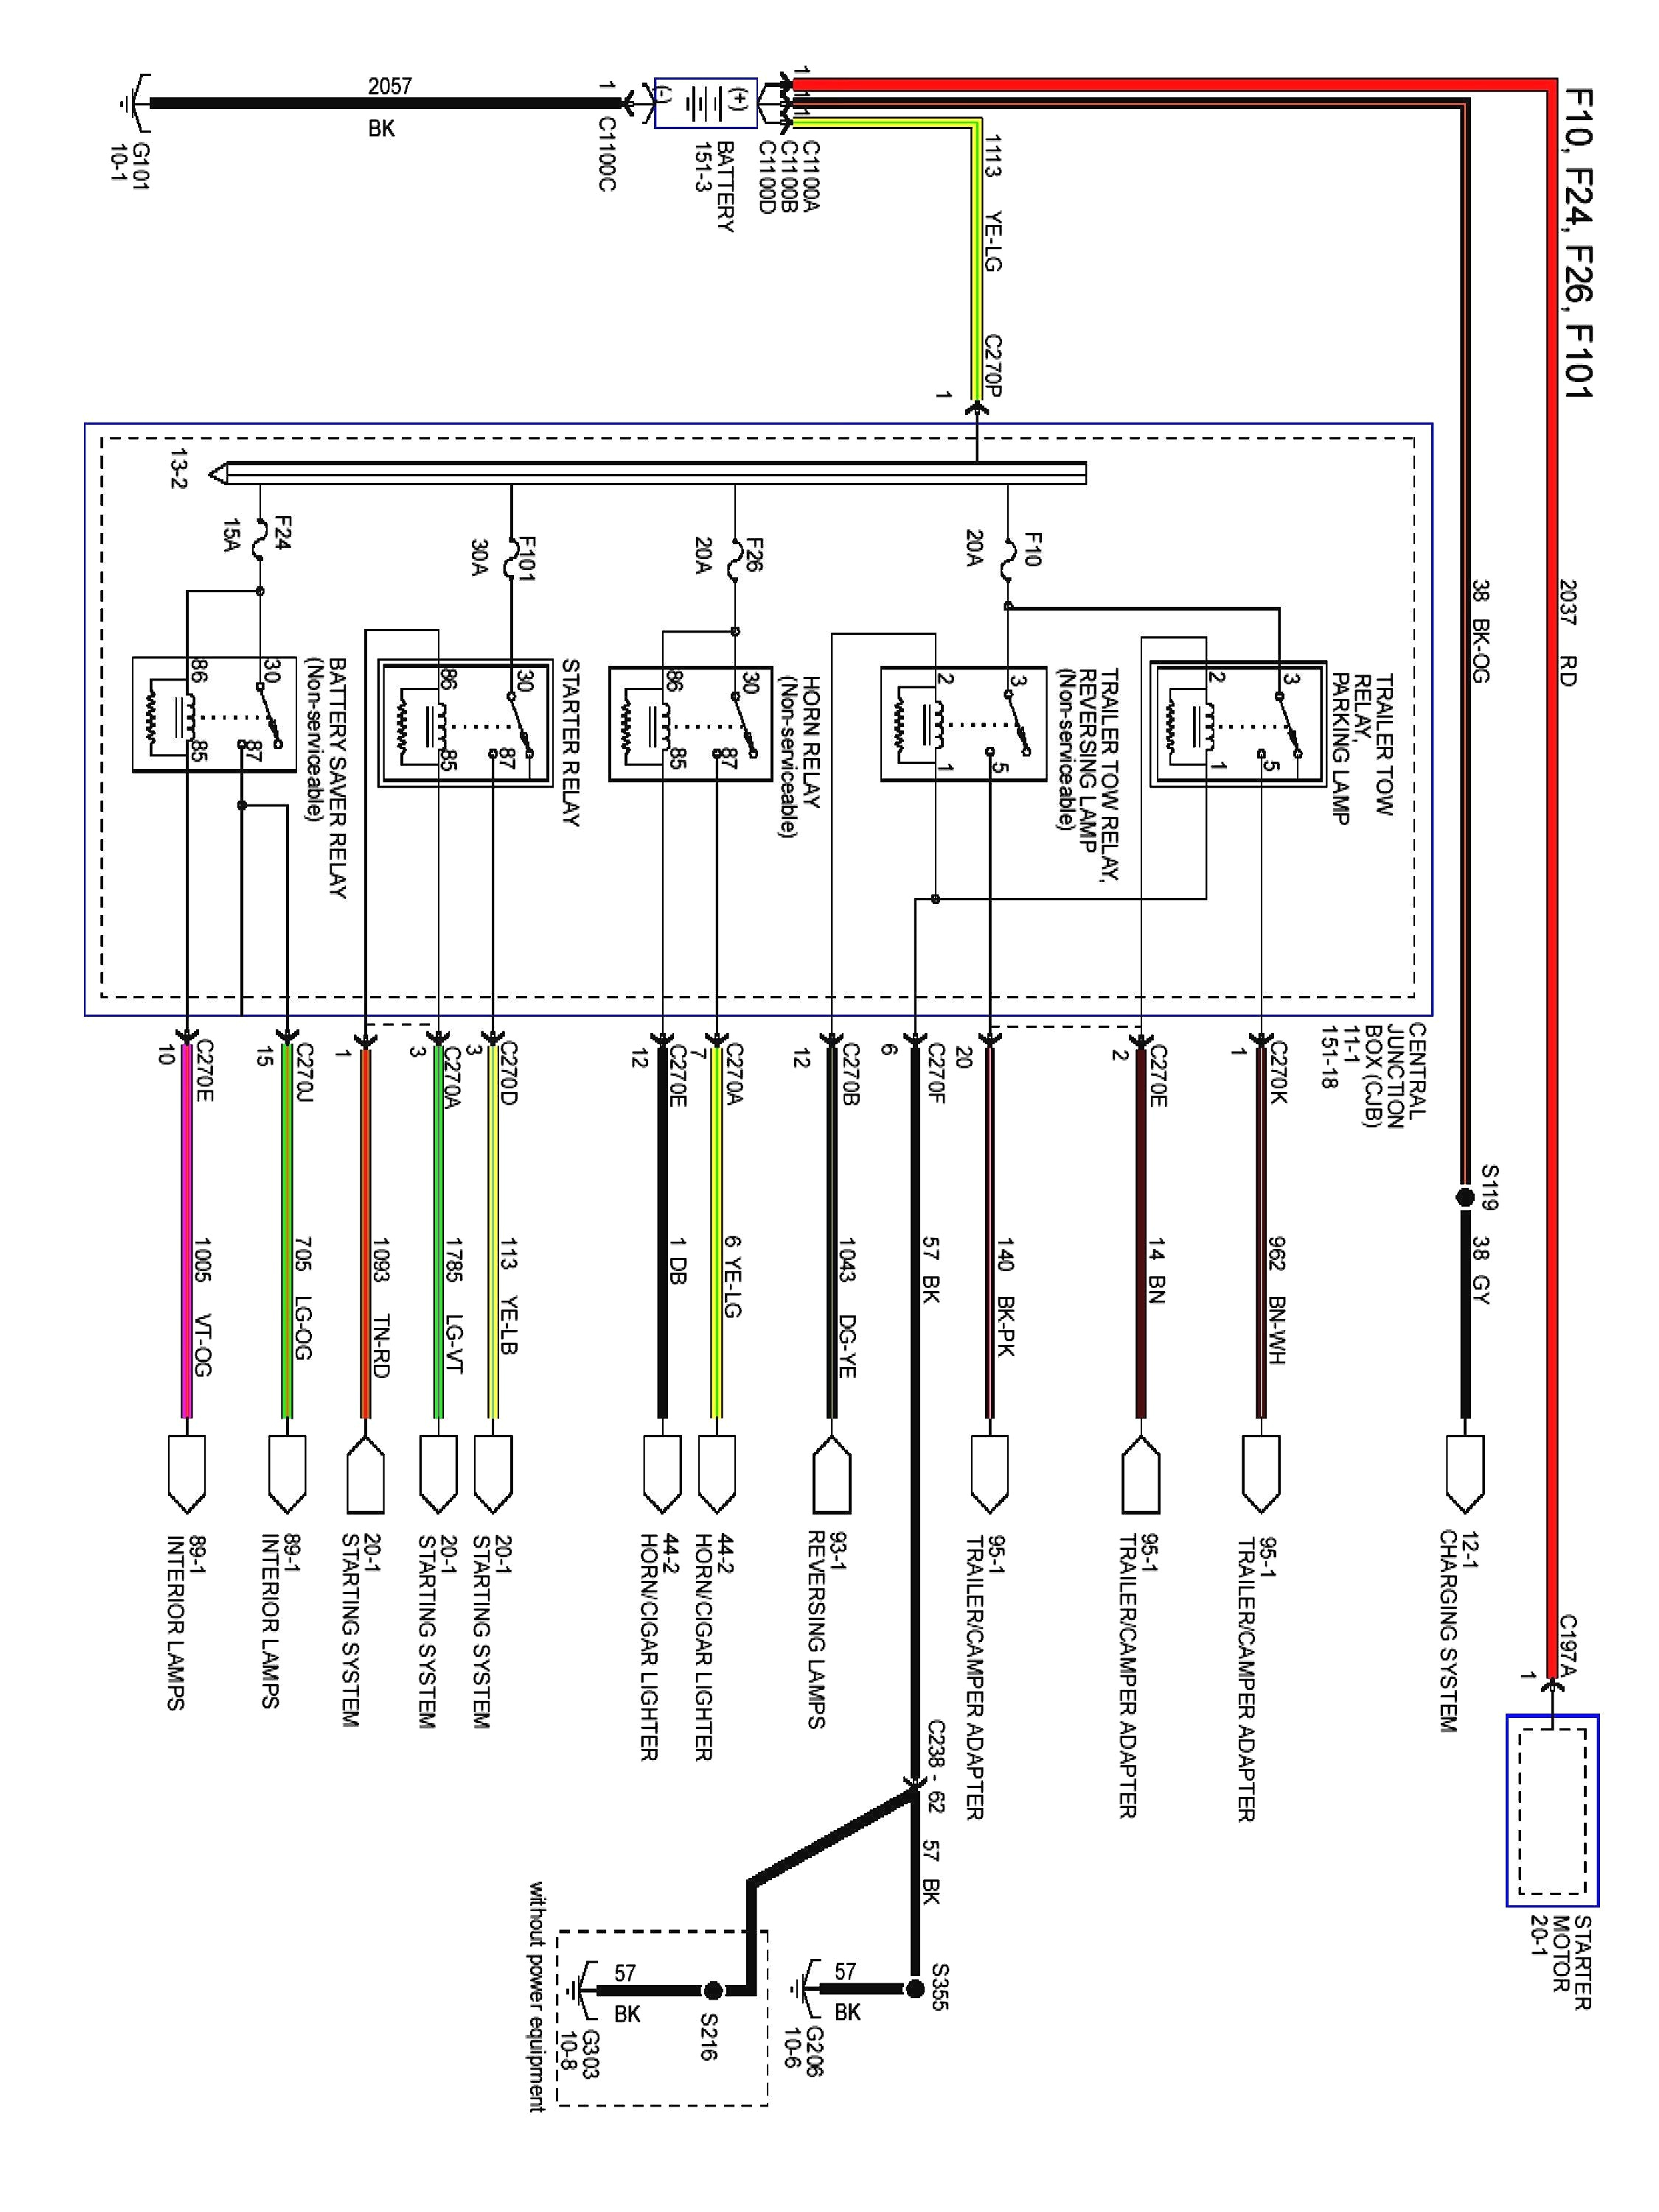 2007 e250 wiring diagram for blower home wiring diagram 2001 ford e250 wiring diagram 2001 ford e250 wiring diagram